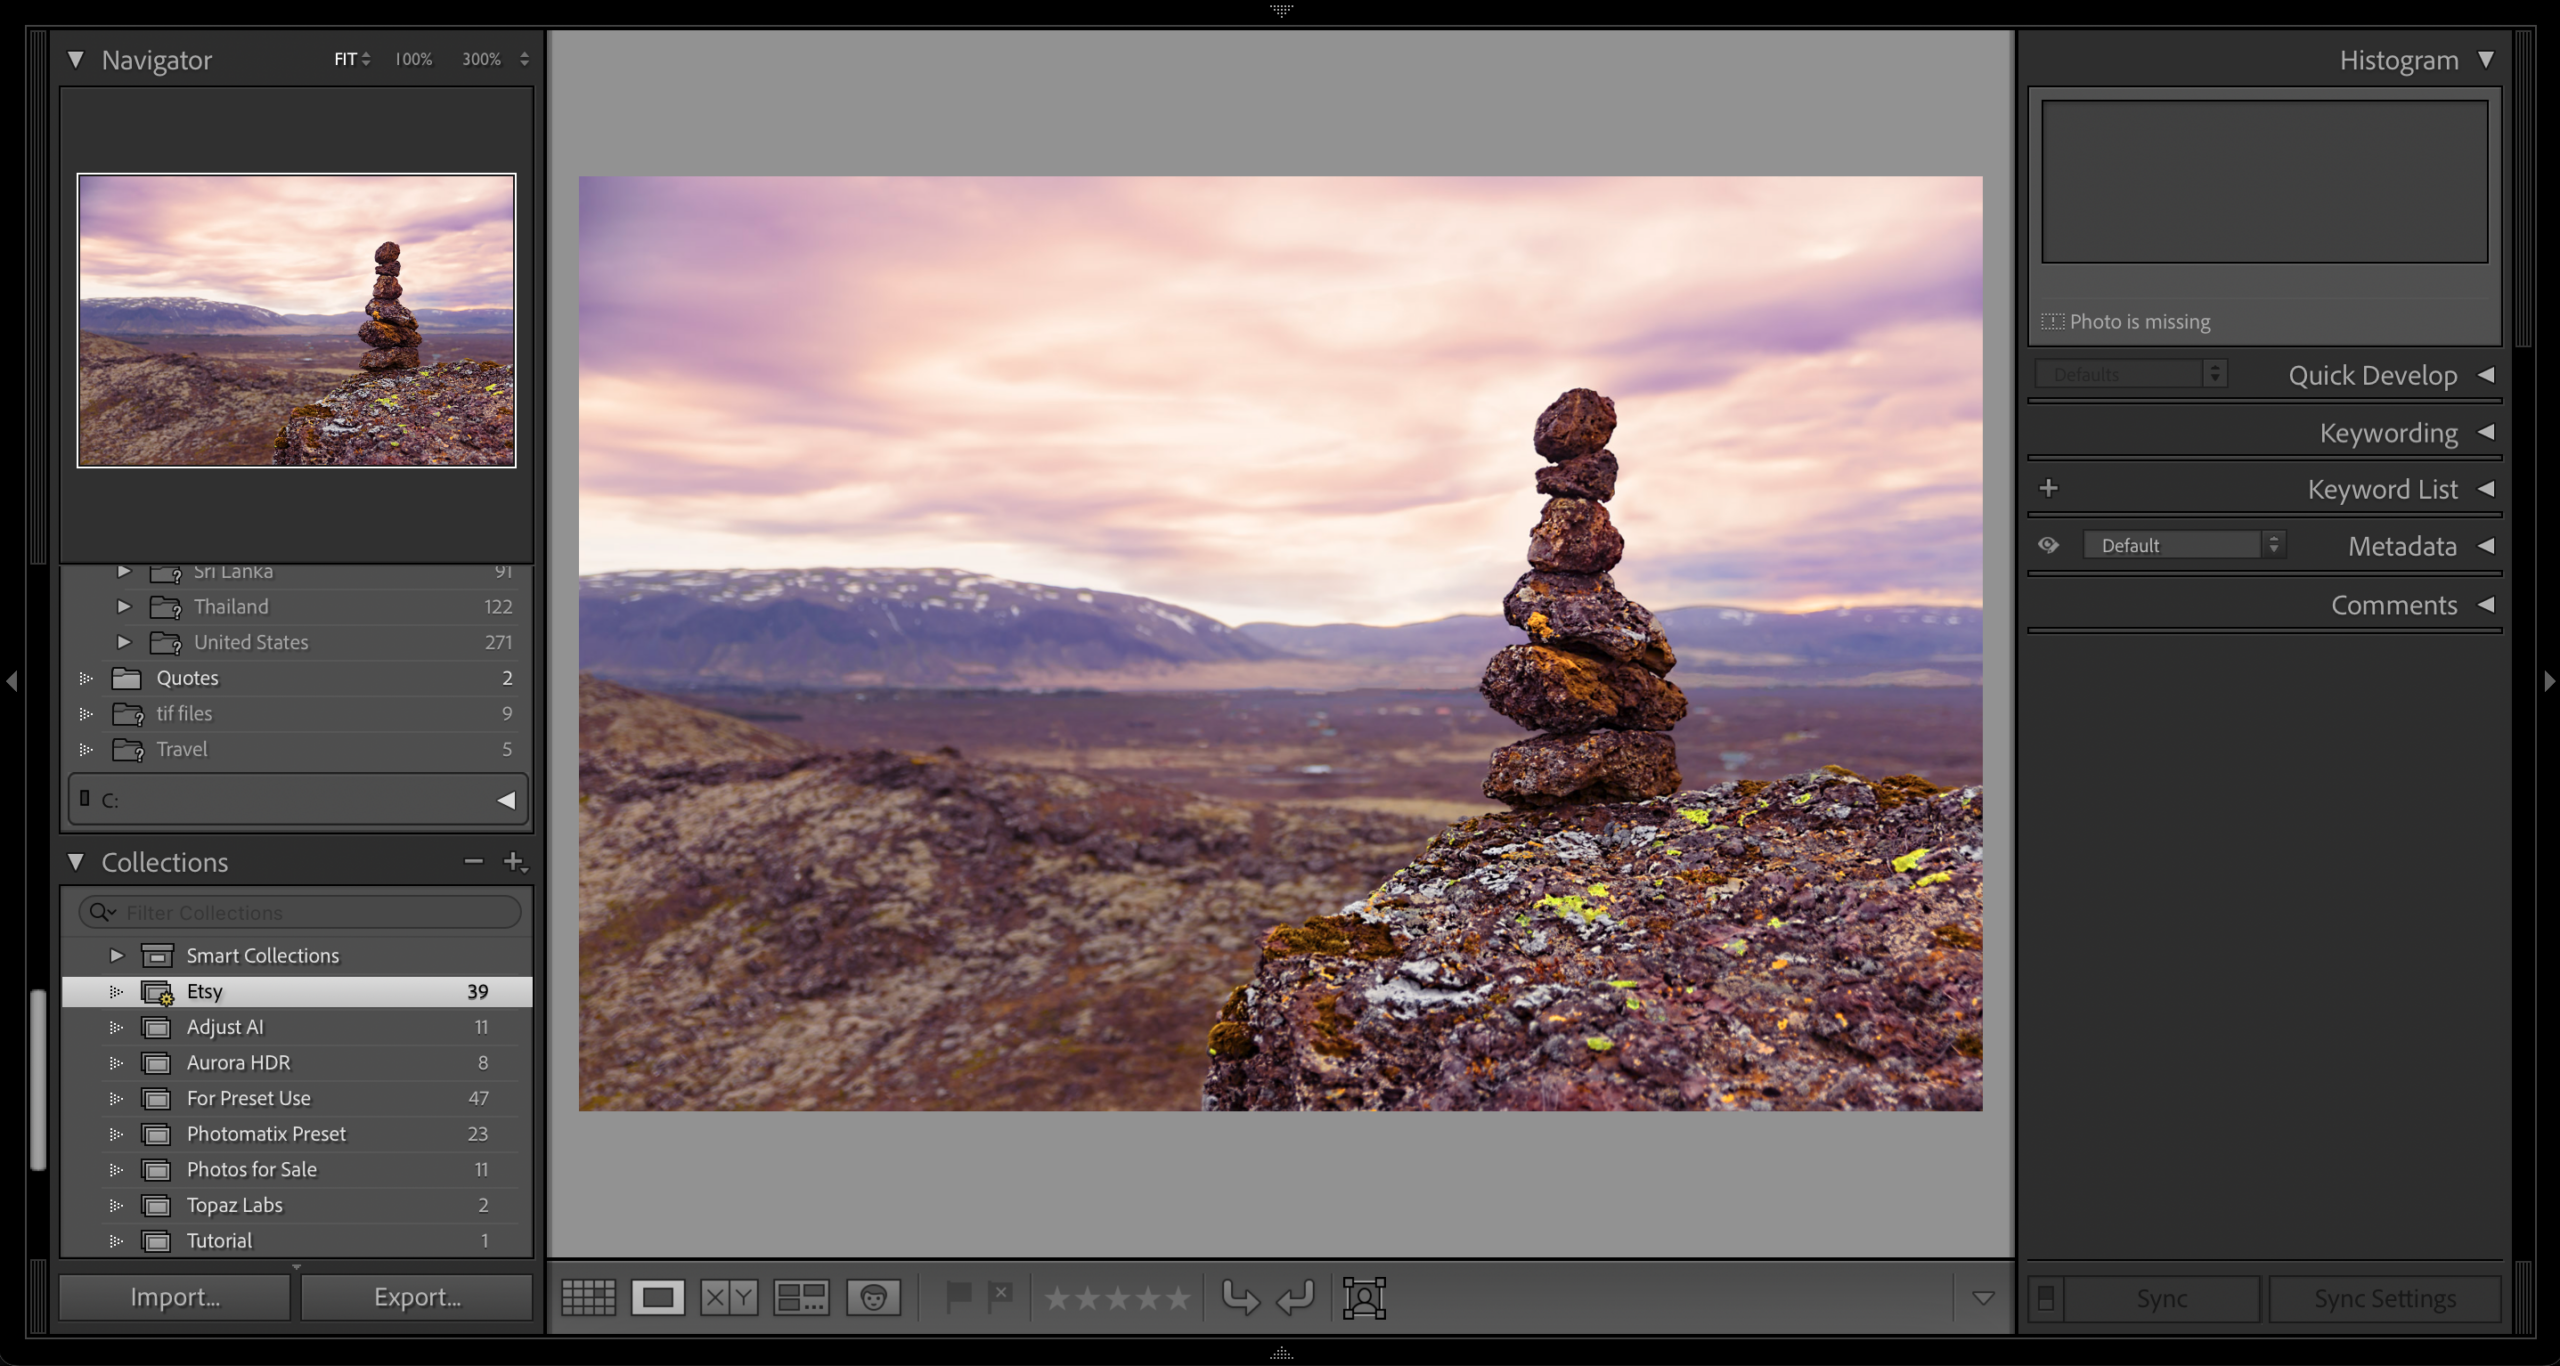 Can Lightroom Open and Edit RAW Files? Lightroom inferface